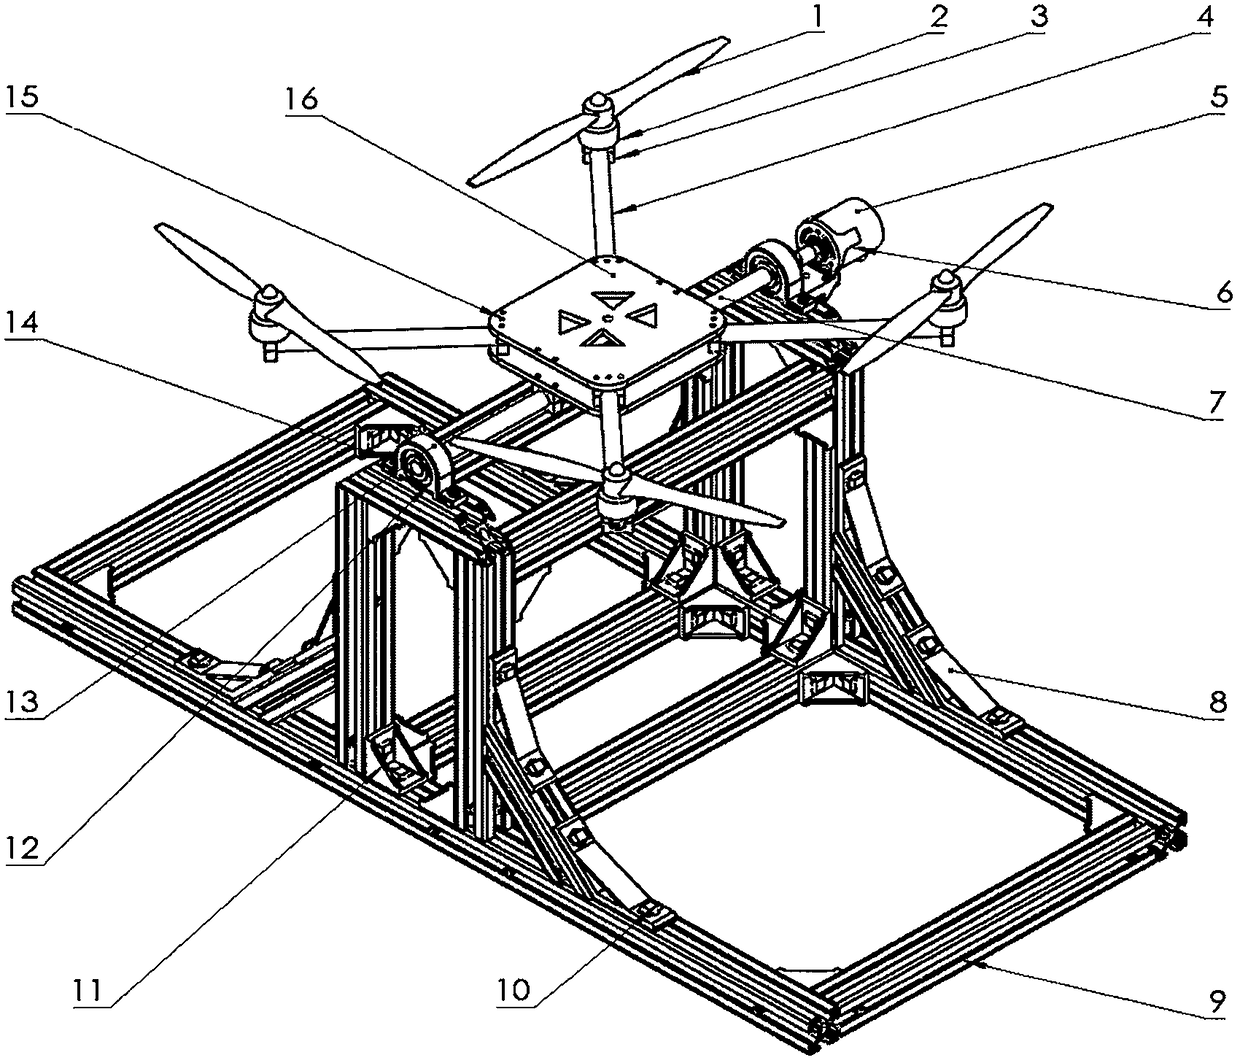 Mechanical system of scientific research and teaching test stand of four-rotor unmanned aerial vehicle